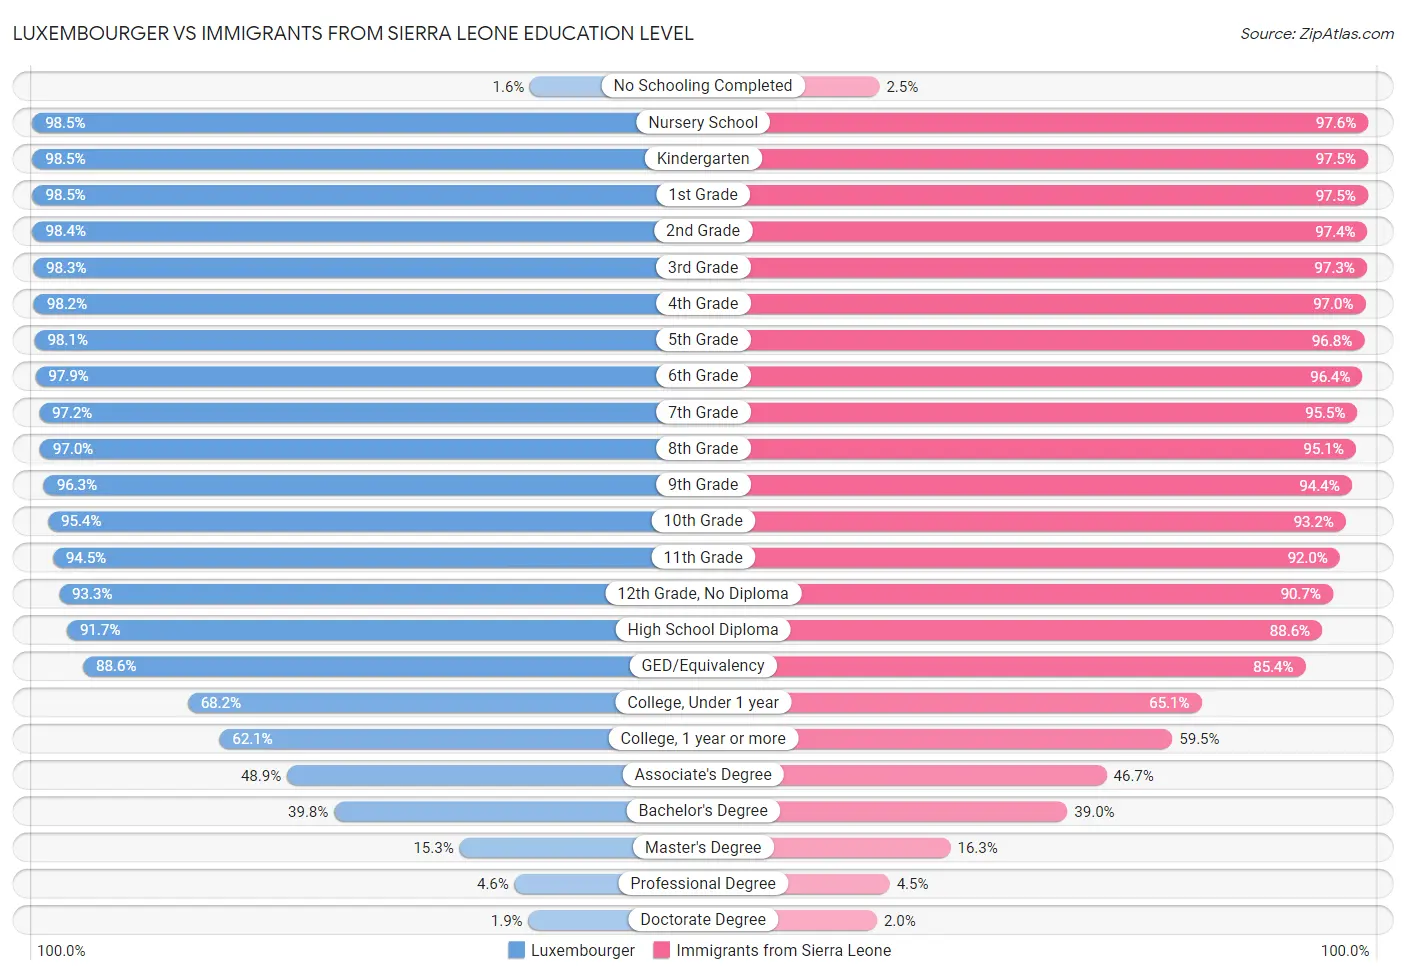 Luxembourger vs Immigrants from Sierra Leone Education Level